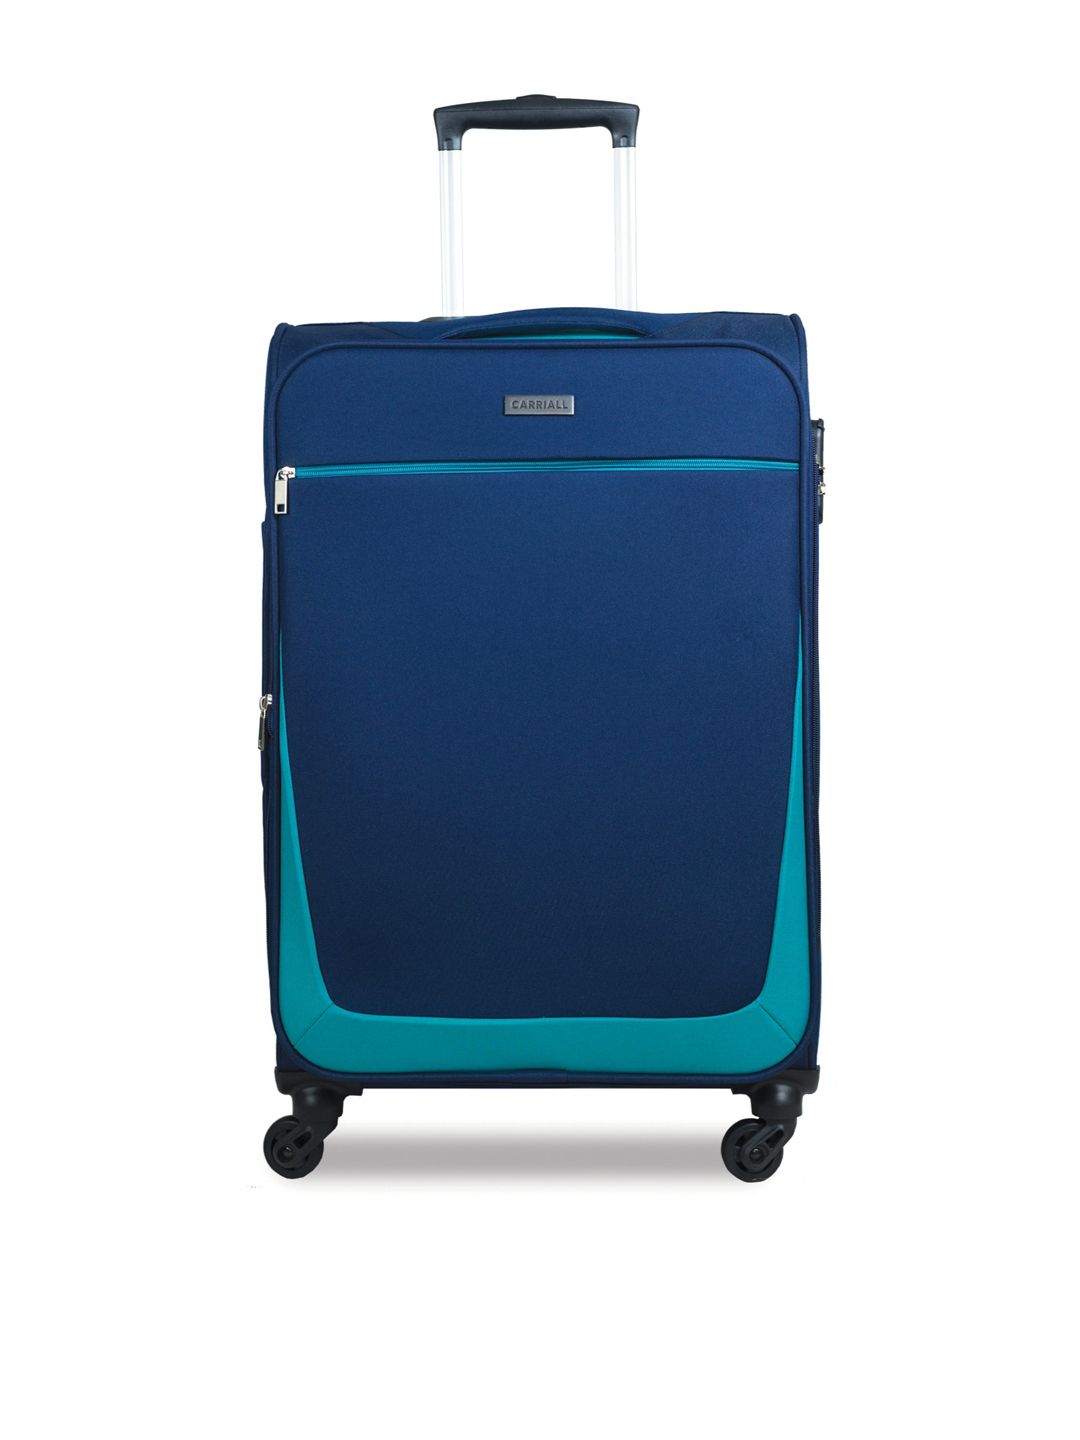 CARRIALL Adults Navy Blue & Green Solid Soft Sided Trolley Bag Price in India